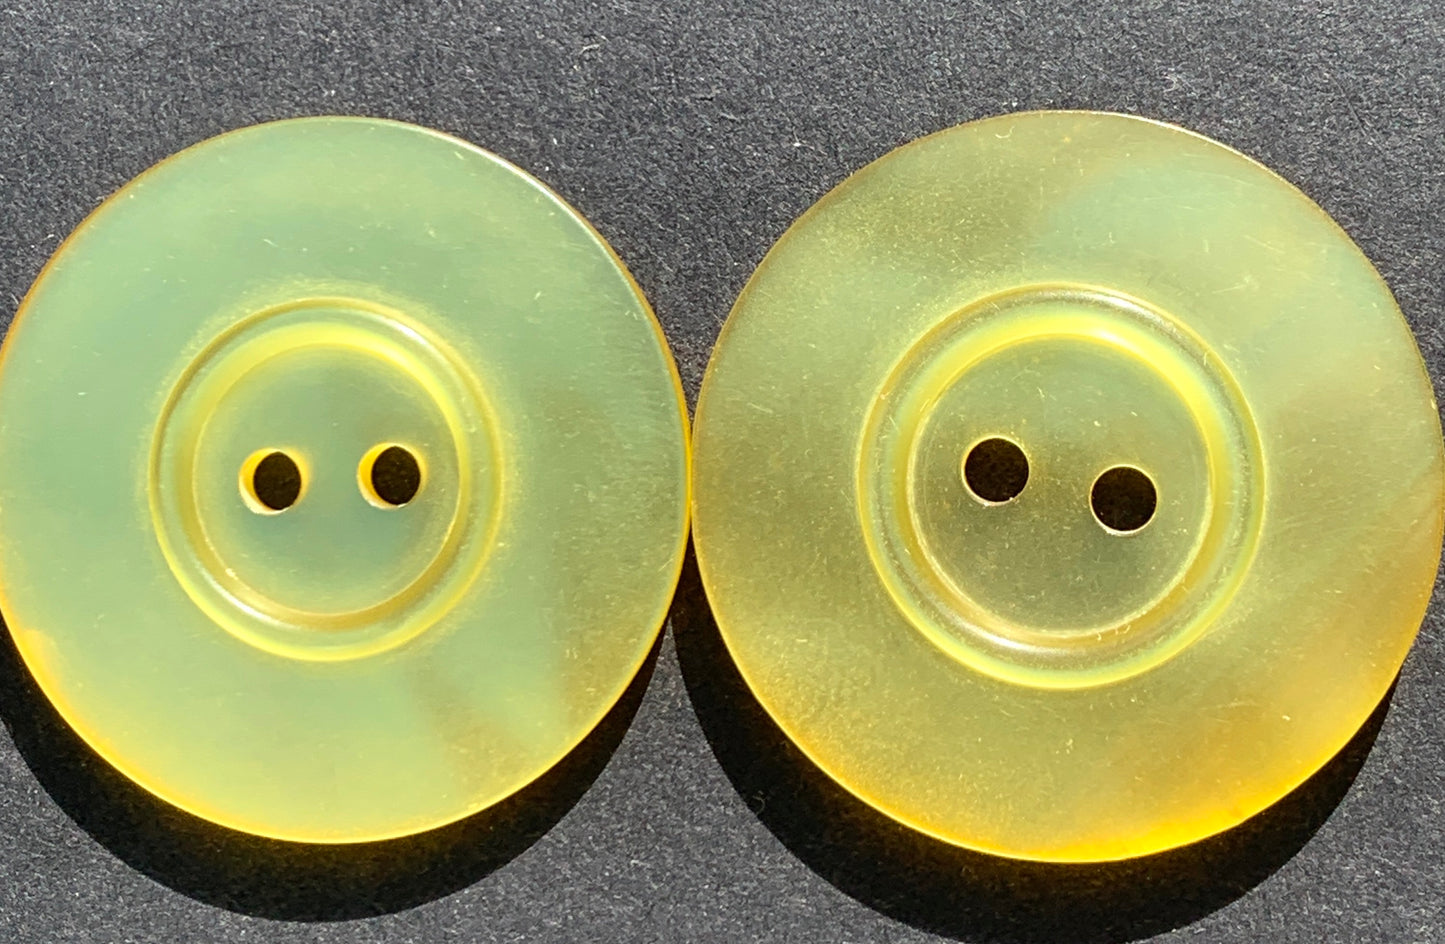 1 Shimmering Moonglow Lucite Yellow 3.5cm Vintage Buttons